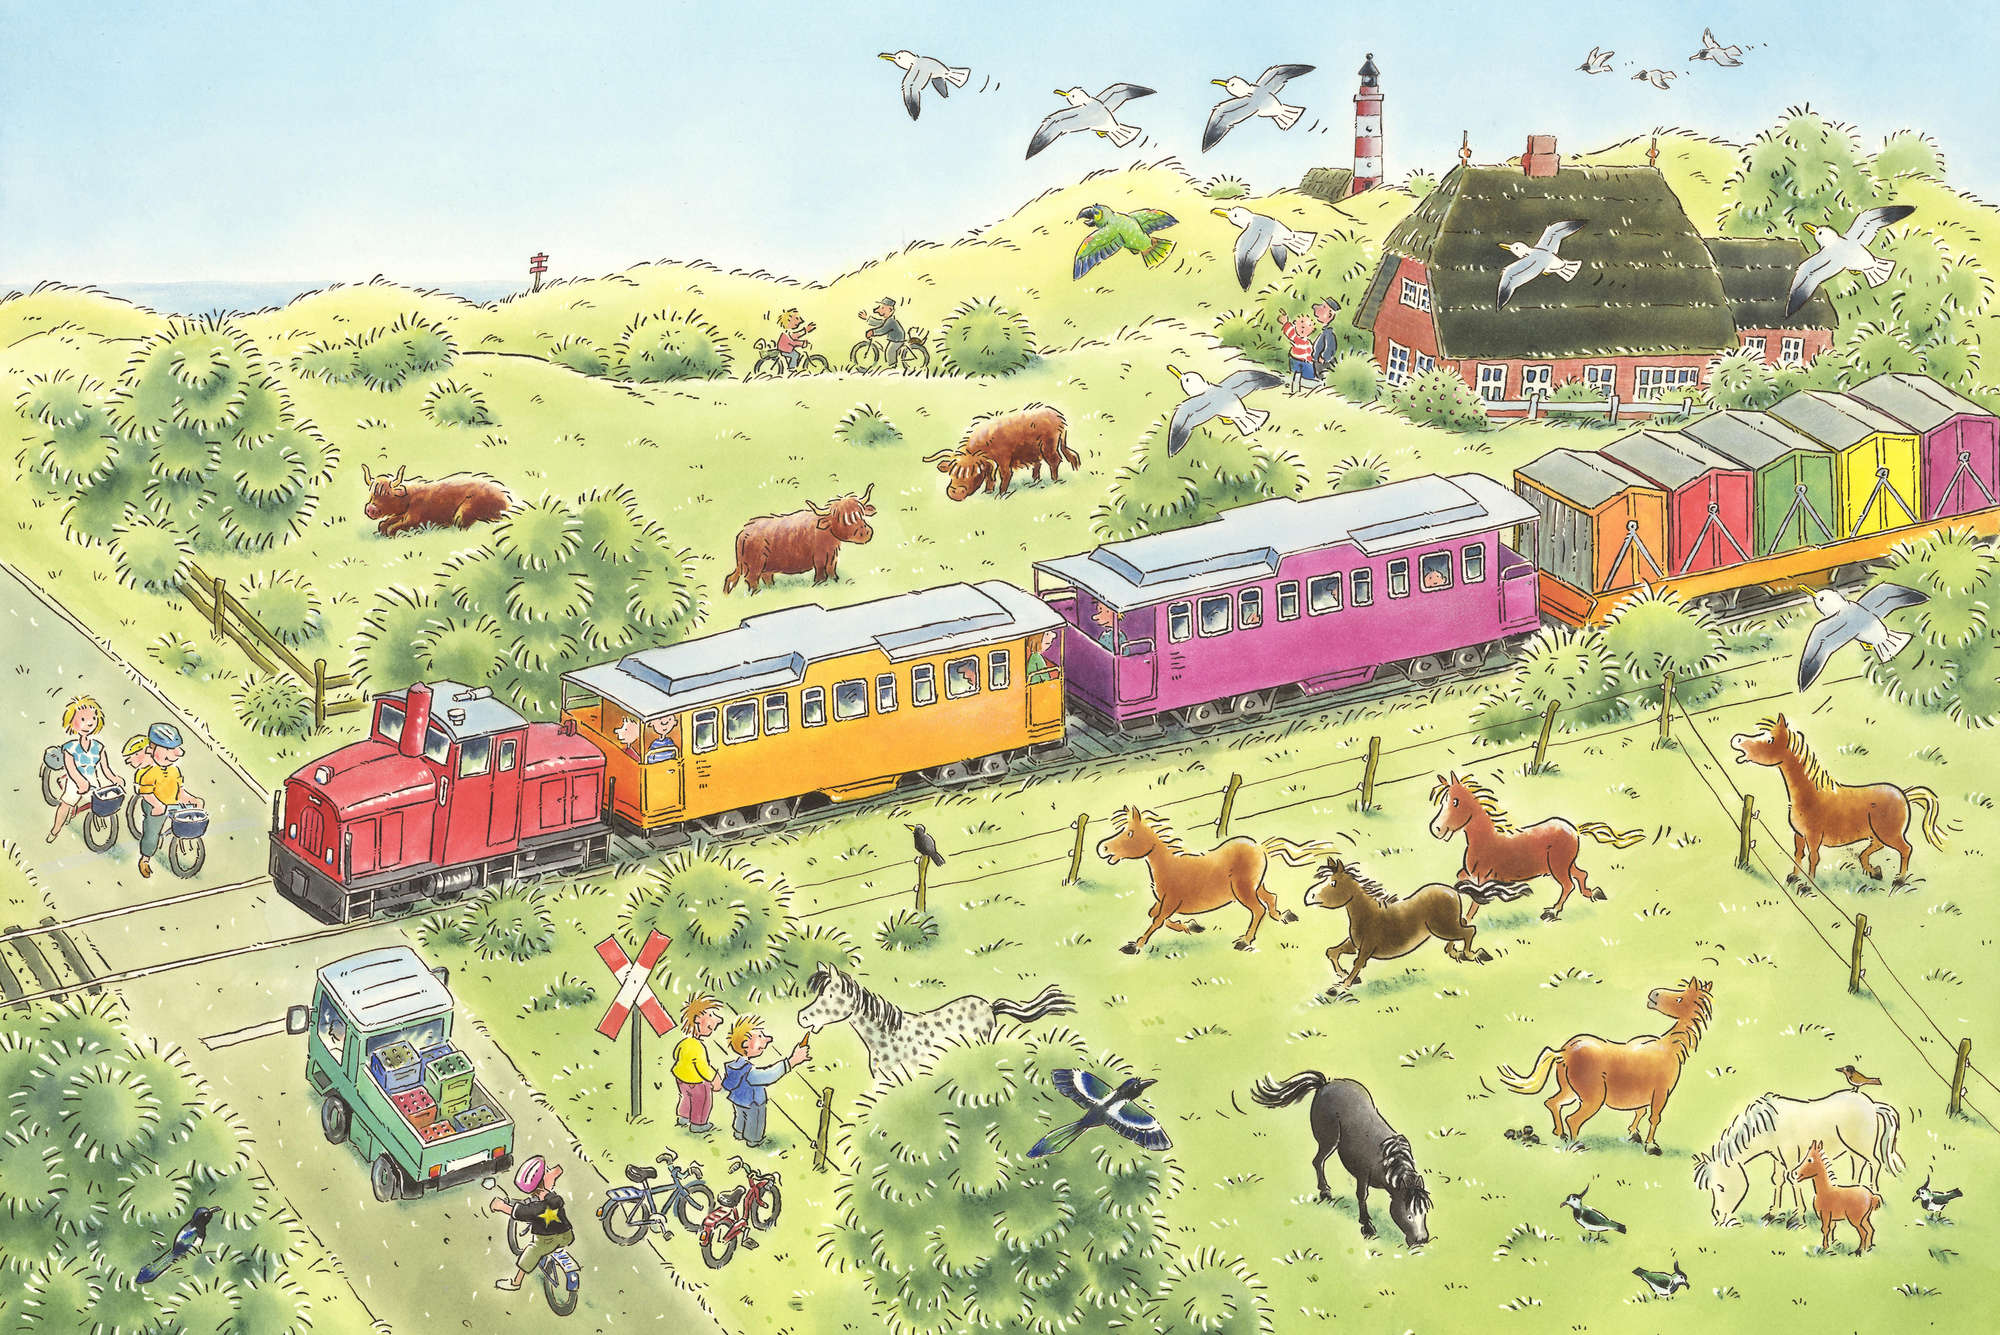             Children mural railroad crossing with train and animals on structural non-woven fabric
        